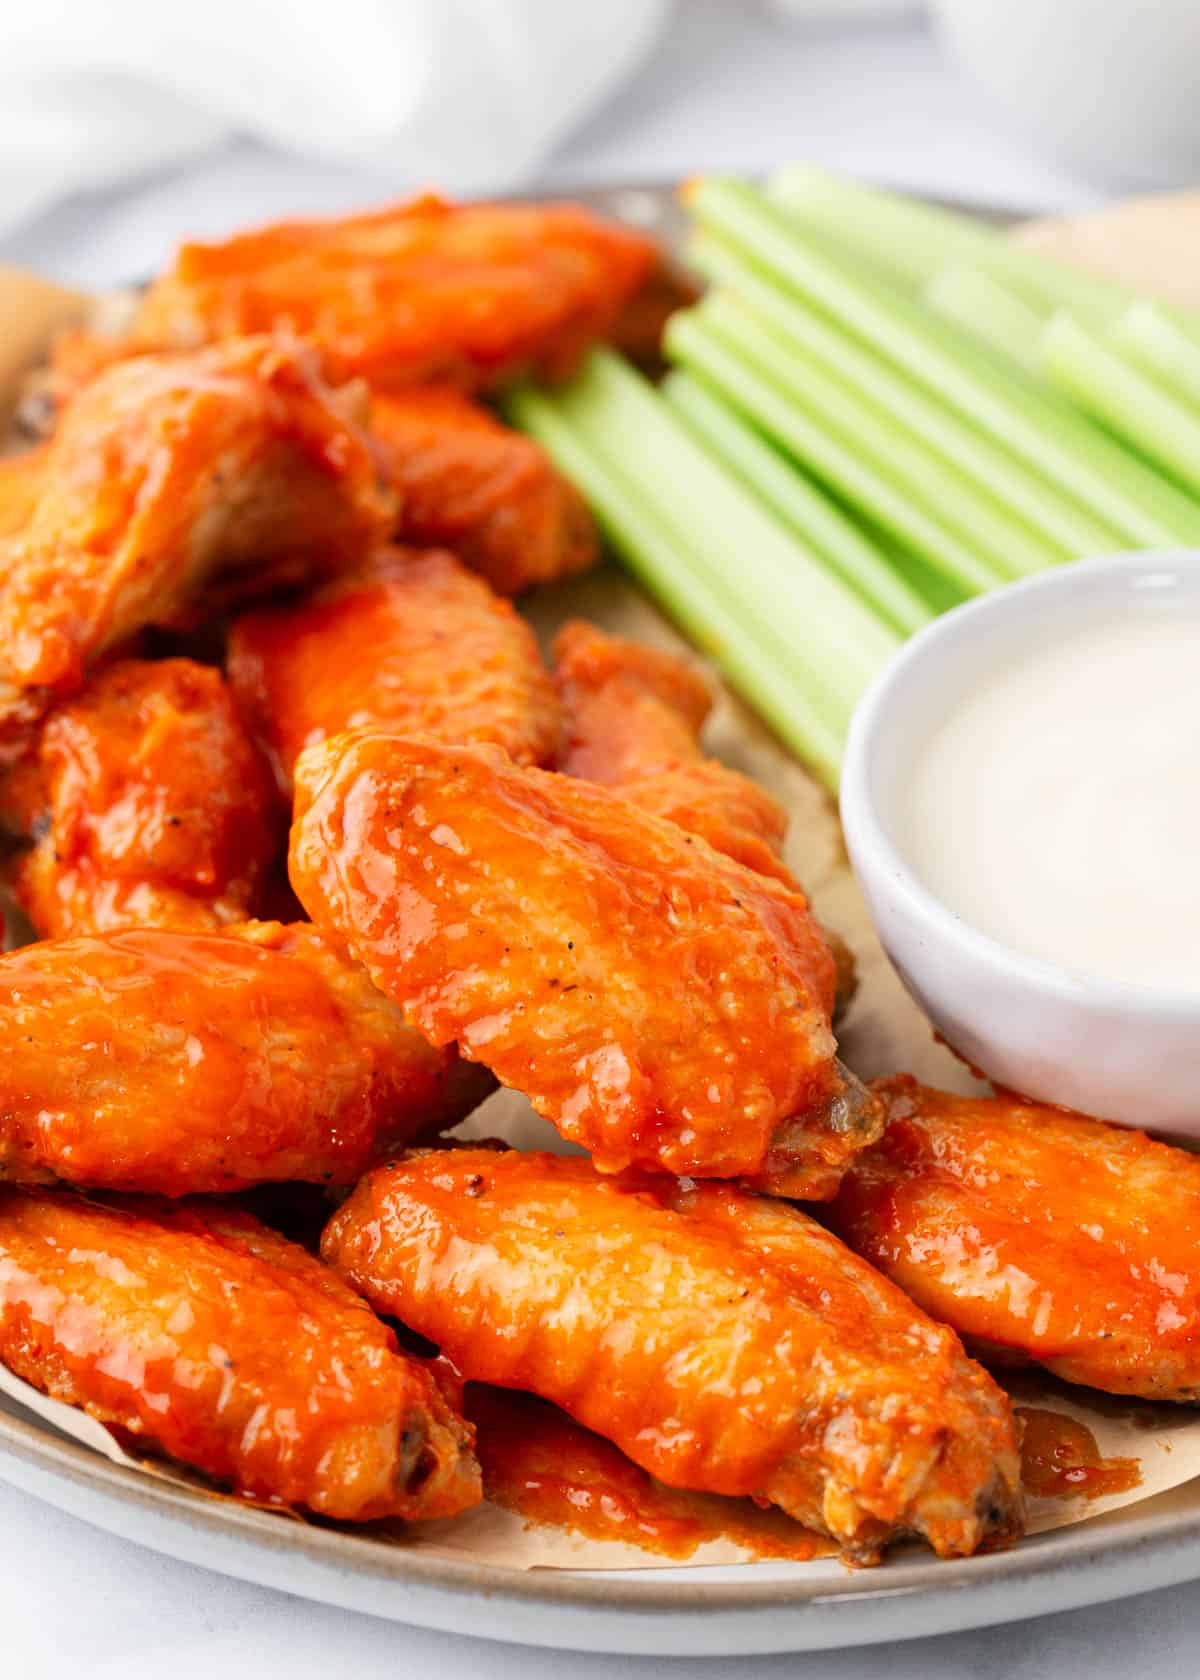 Buffalo wings on a plate with dip.